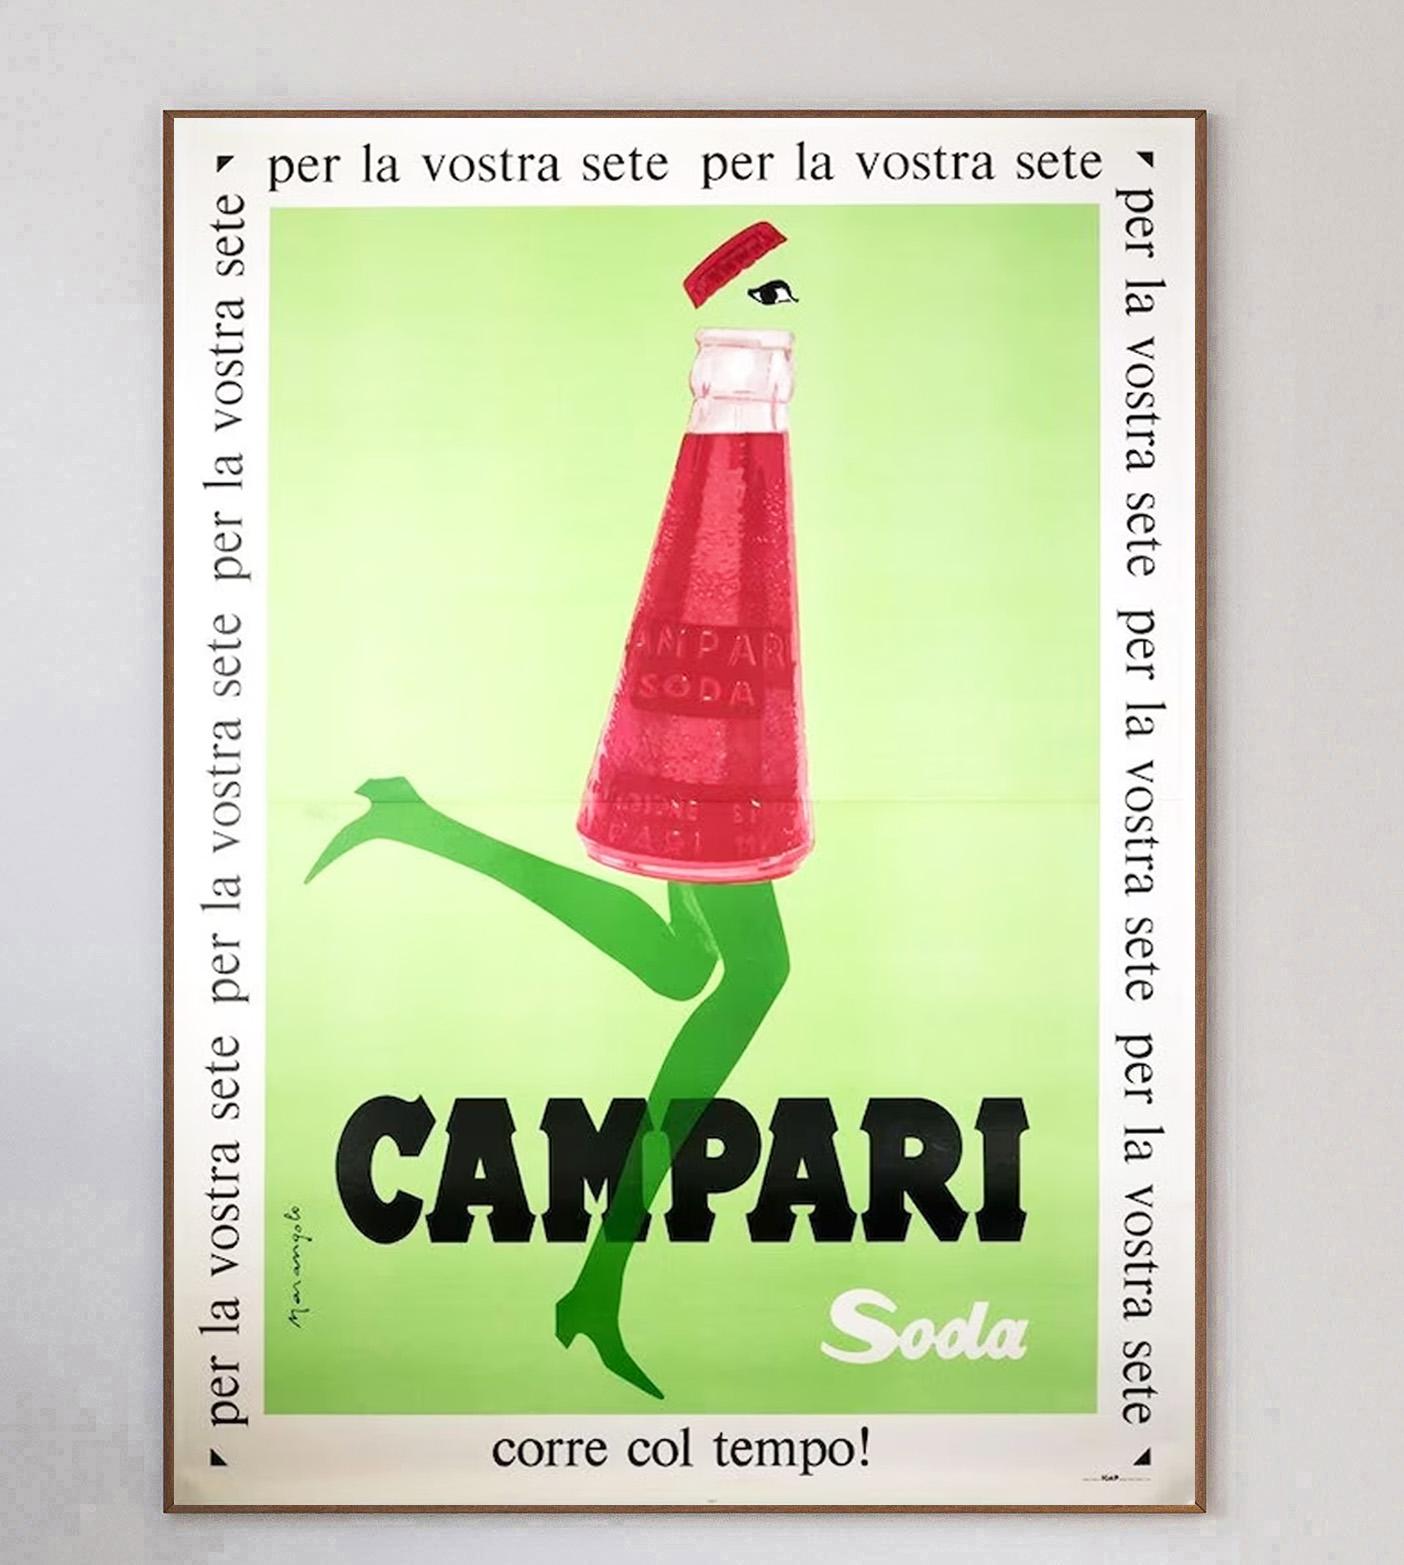 Campari was formed in 1860 by Gaspare Campari and the aperitif is as popular today as ever. His son, Davide Campari transformed the company in 1926 into what it is widely known for today. This gorgeous lithographic poster was created in 1968 with